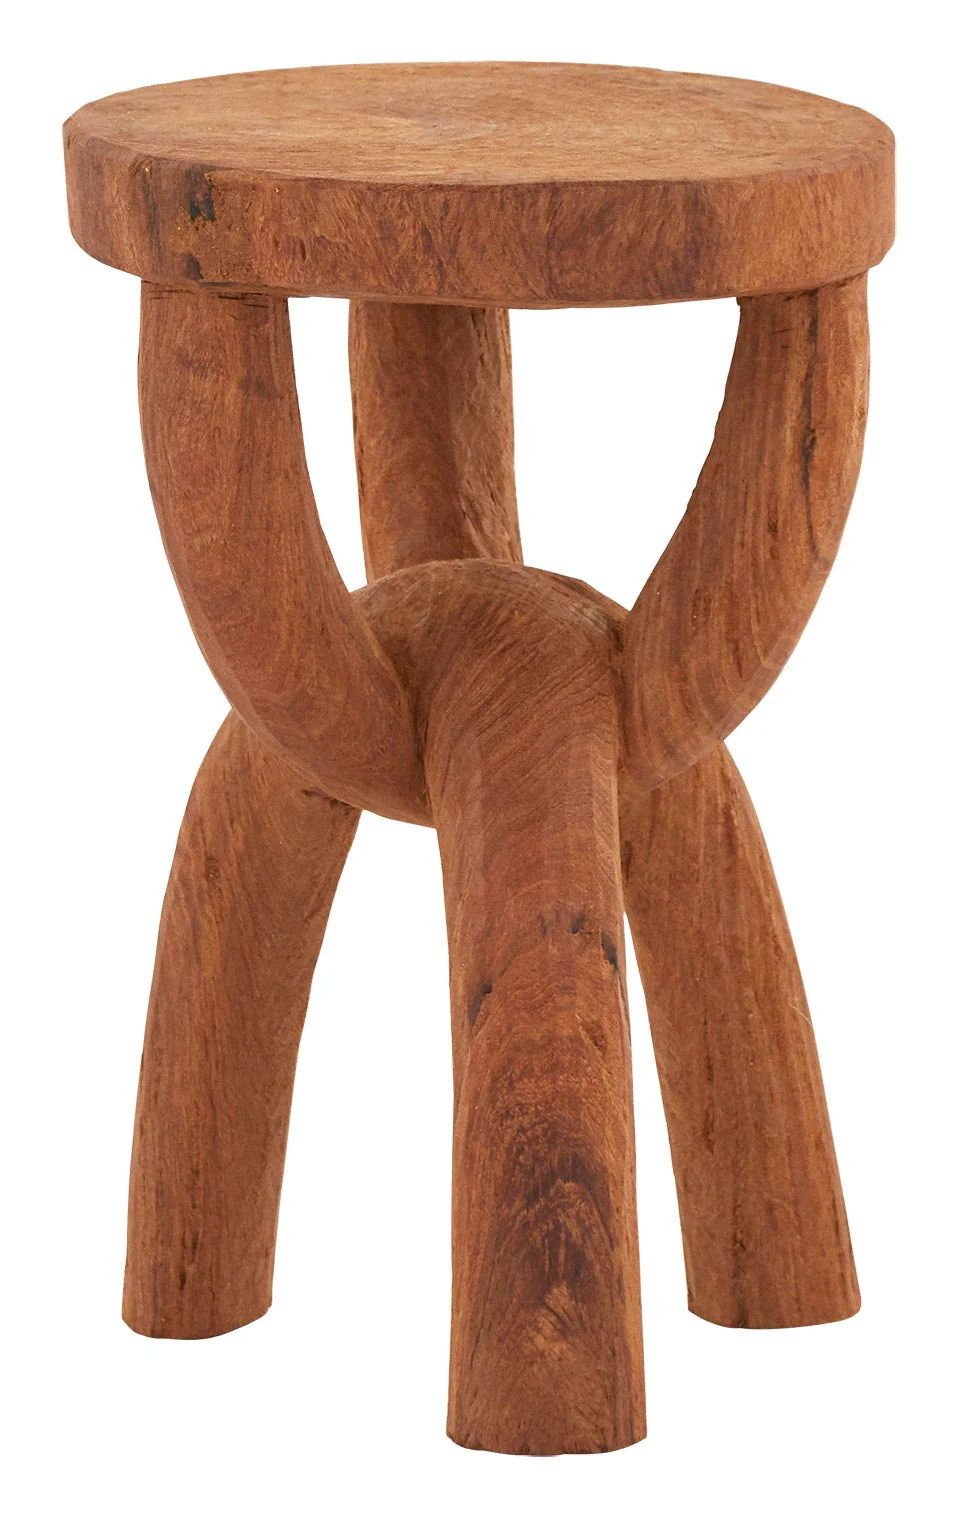 Carved Stool - Chain | Jayson Home